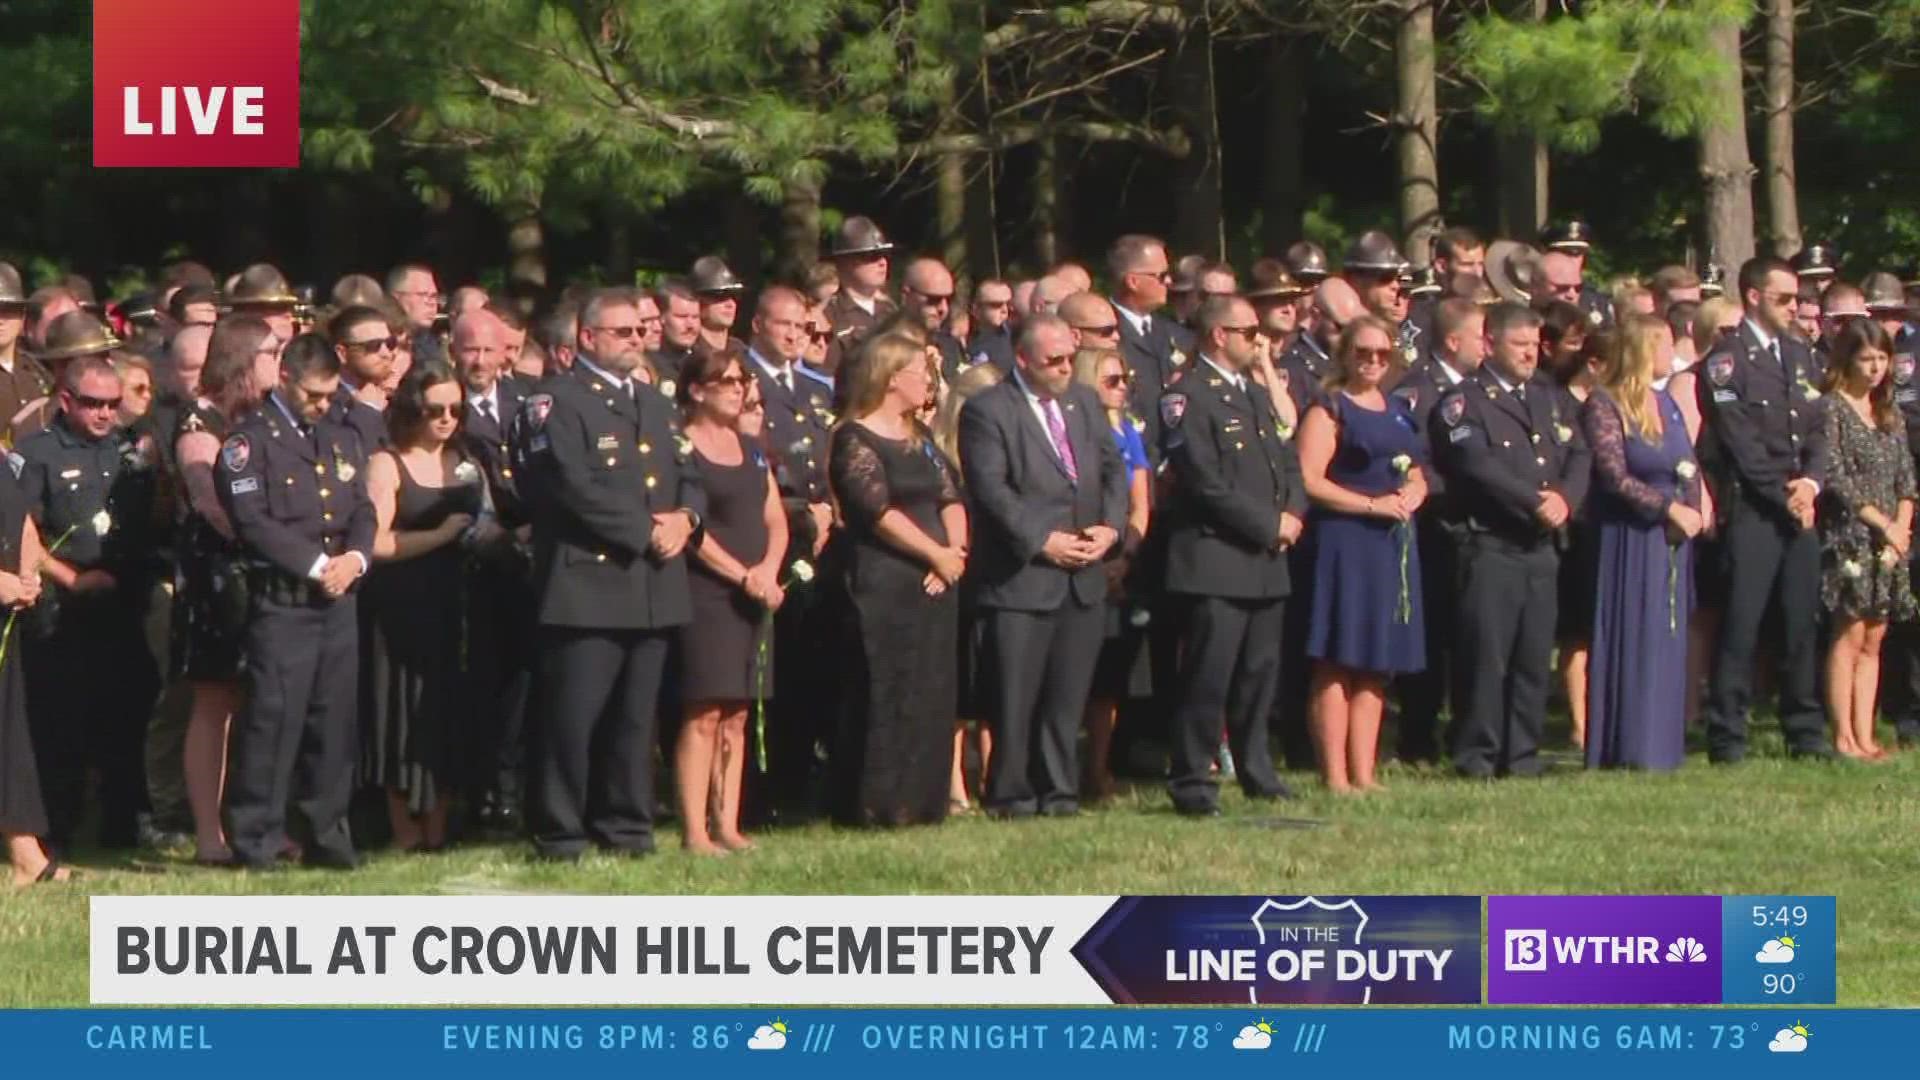 Officer Noah Shahnavaz is being laid to rest at Crown Hill Cemetery in Indianapolis.